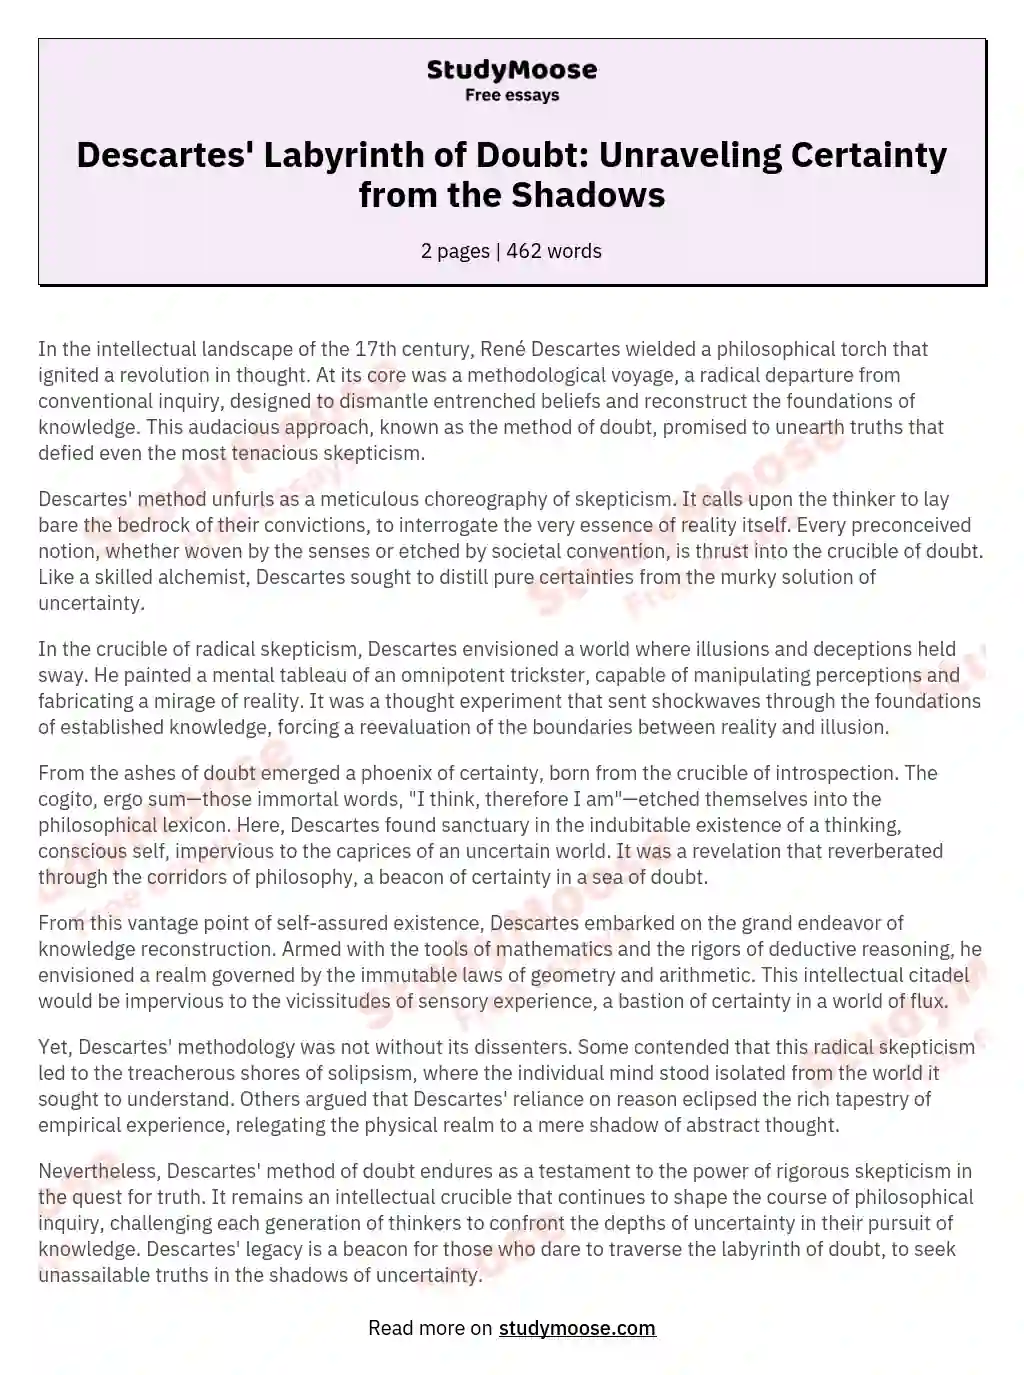 Descartes' Labyrinth of Doubt: Unraveling Certainty from the Shadows essay